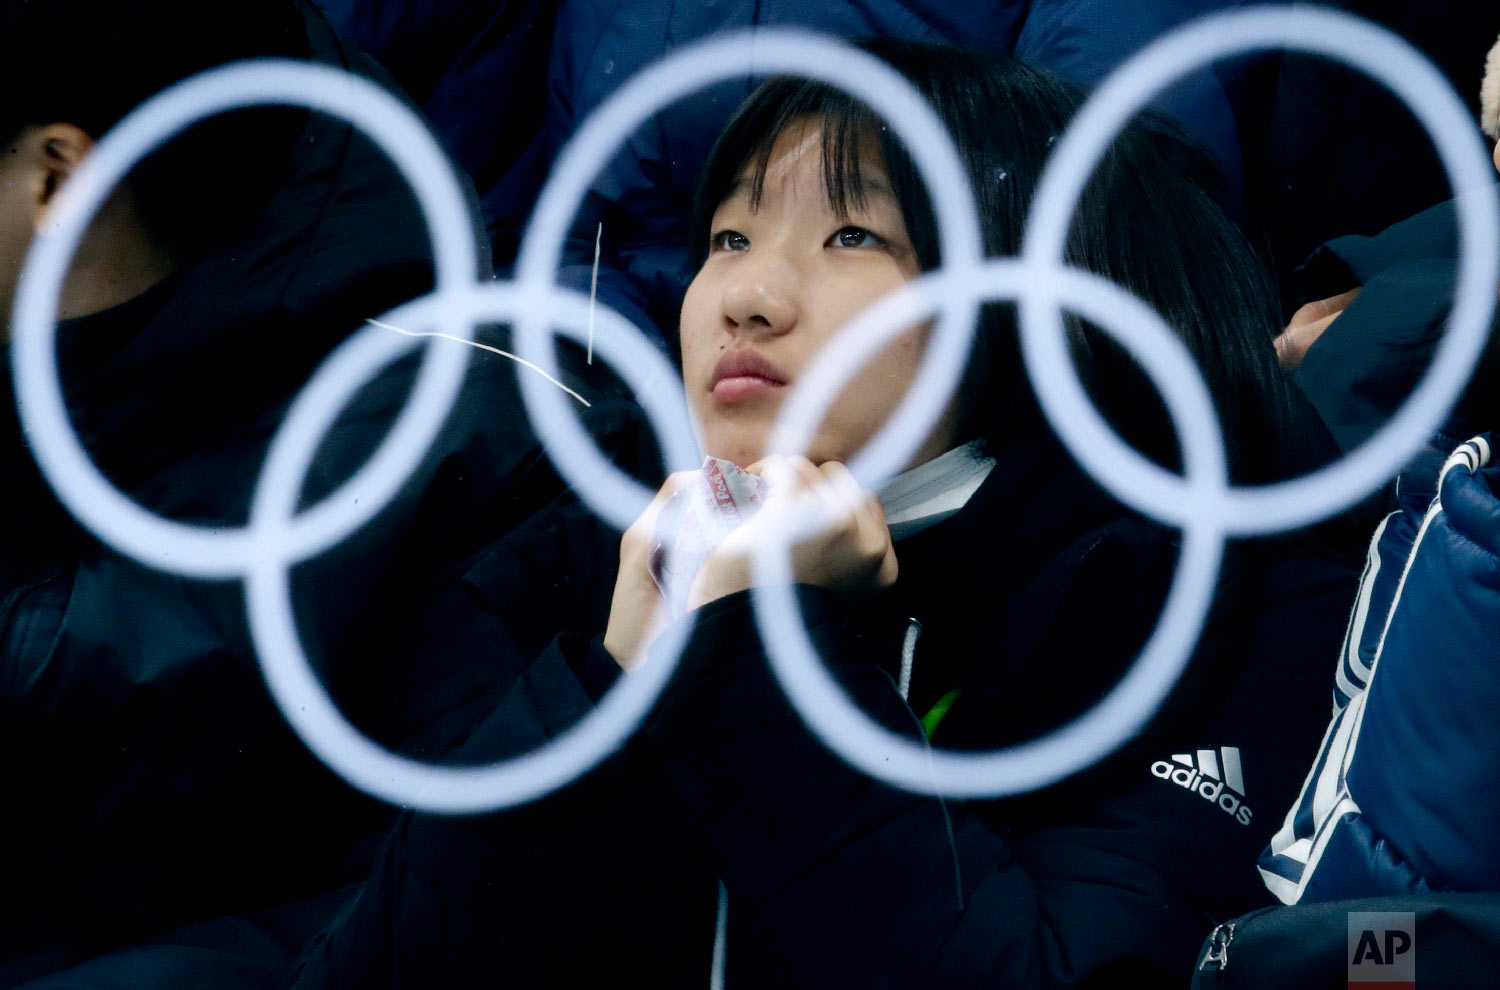  The Olympic rings are reflected in a glass as a spectator watches the mixed doubles semi-final curling match between Canada and Norway at the 2018 Winter Olympics in Gangneung, South Korea, Monday, Feb. 12, 2018. (AP Photo/Natacha Pisarenko) 